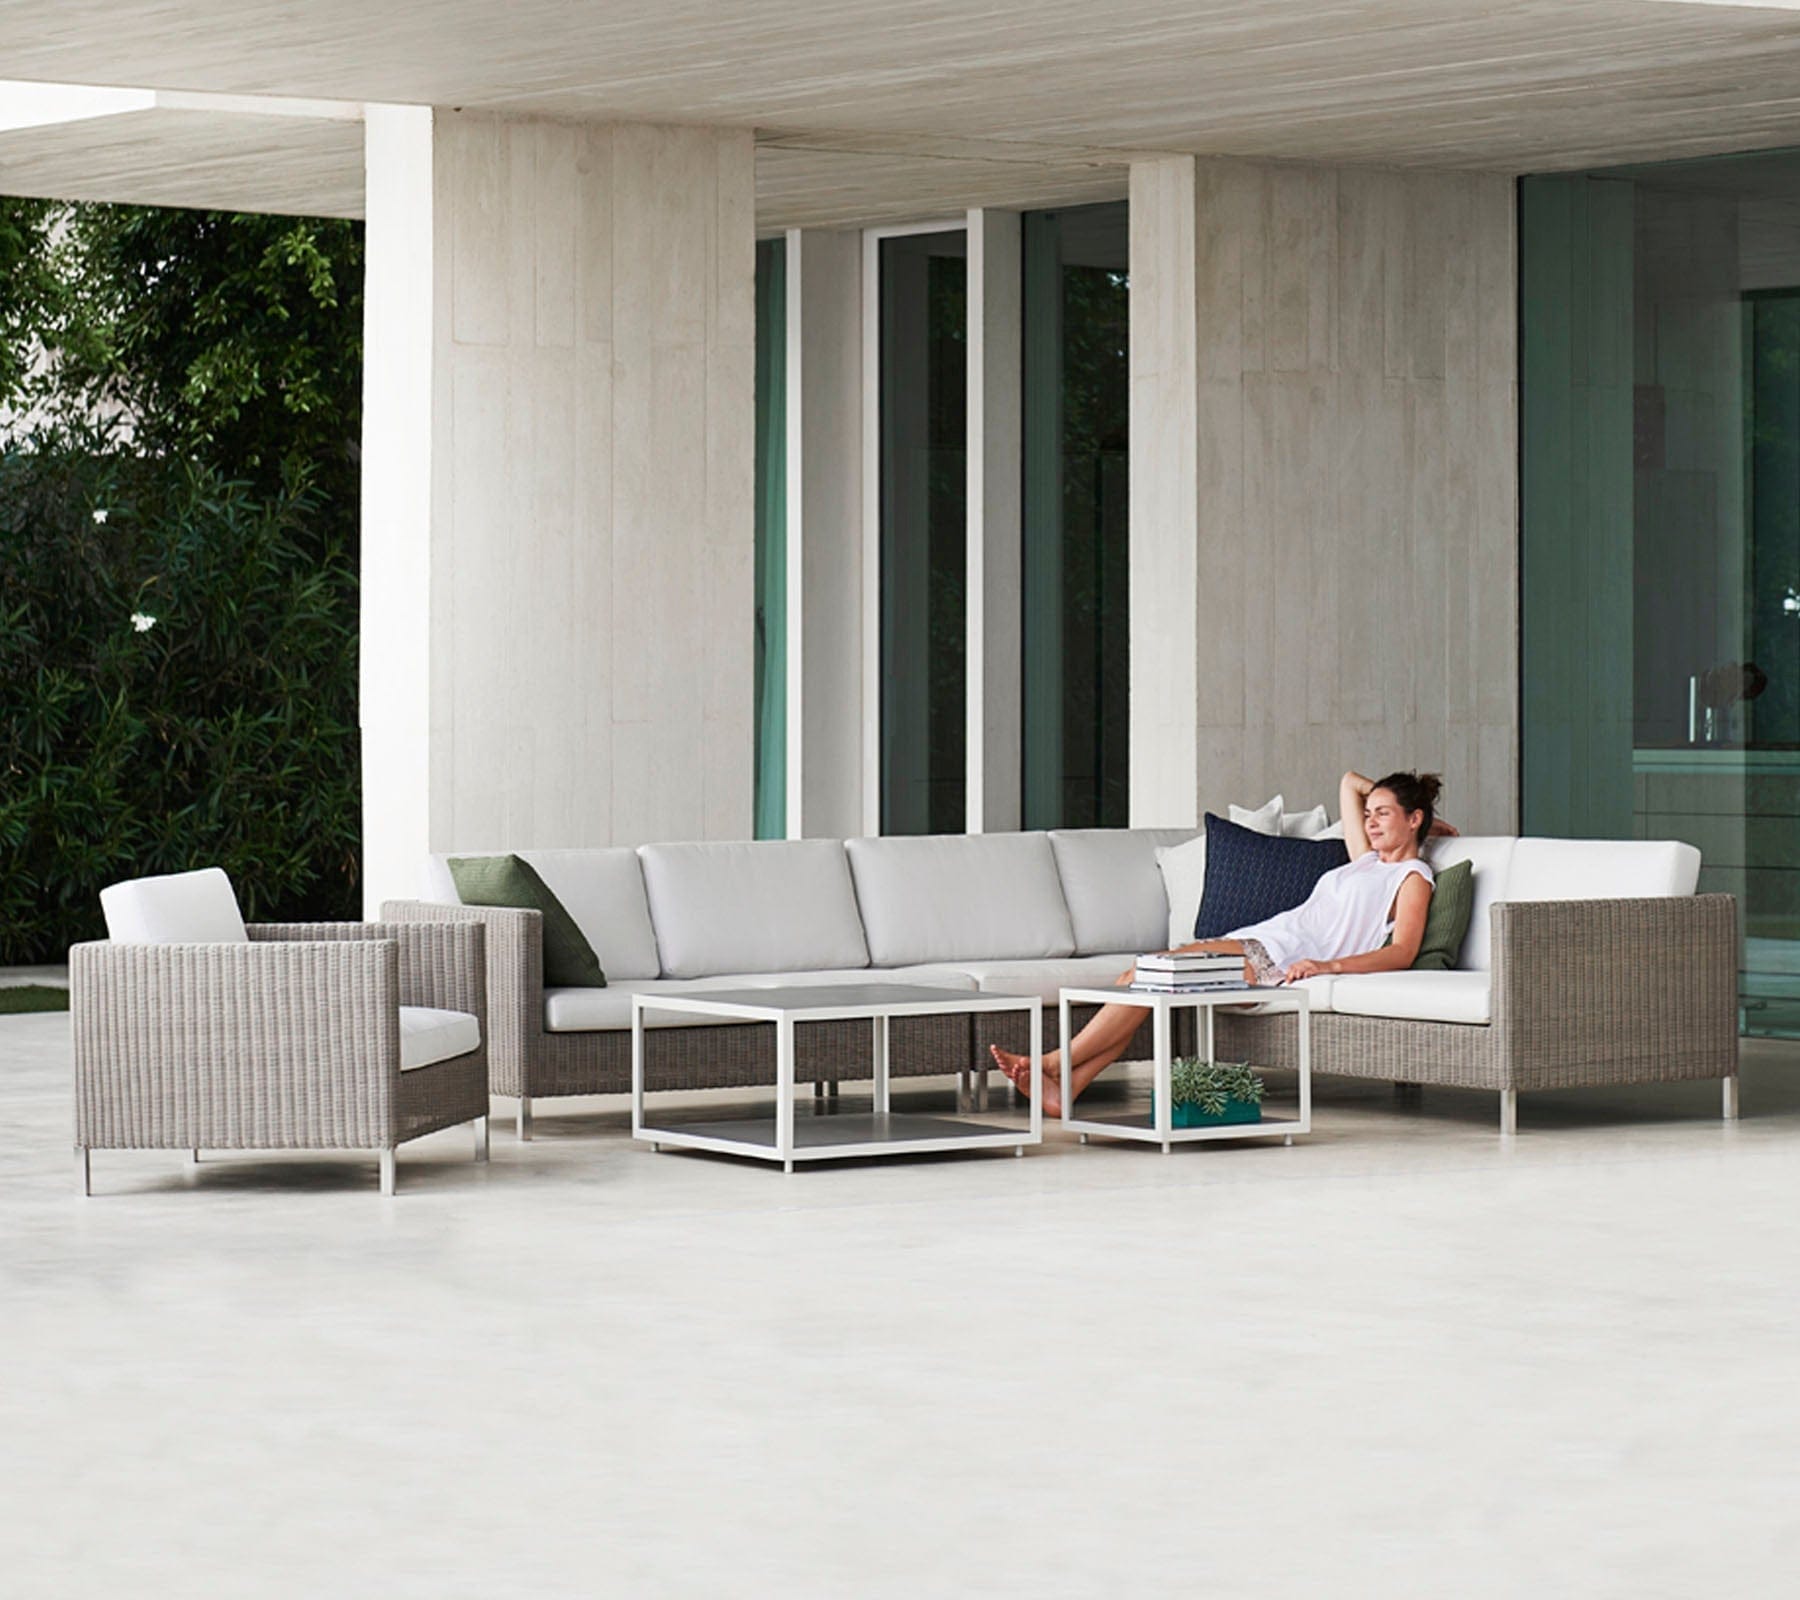 Boxhill's Connect Lounge Chair lifestyle image at patio with other module sofa and a woman sitting down 